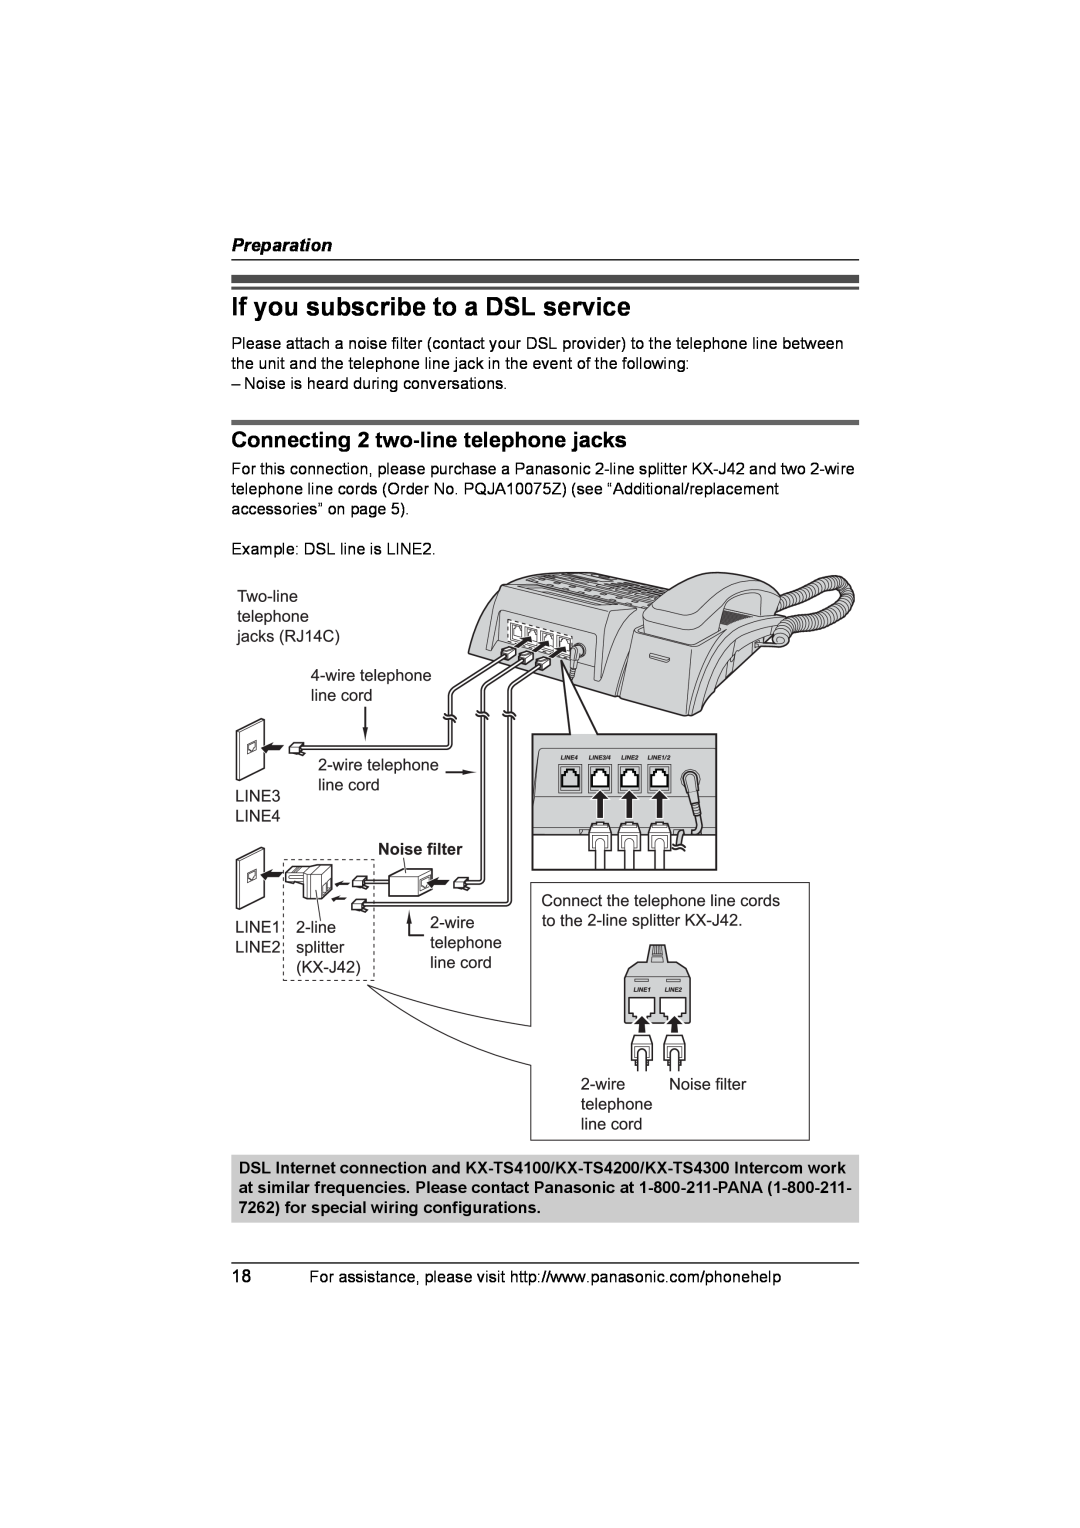 Panasonic KX-TS4100 If you subscribe to a DSL service, Connecting 2 two-line telephone jacks, Preparation 